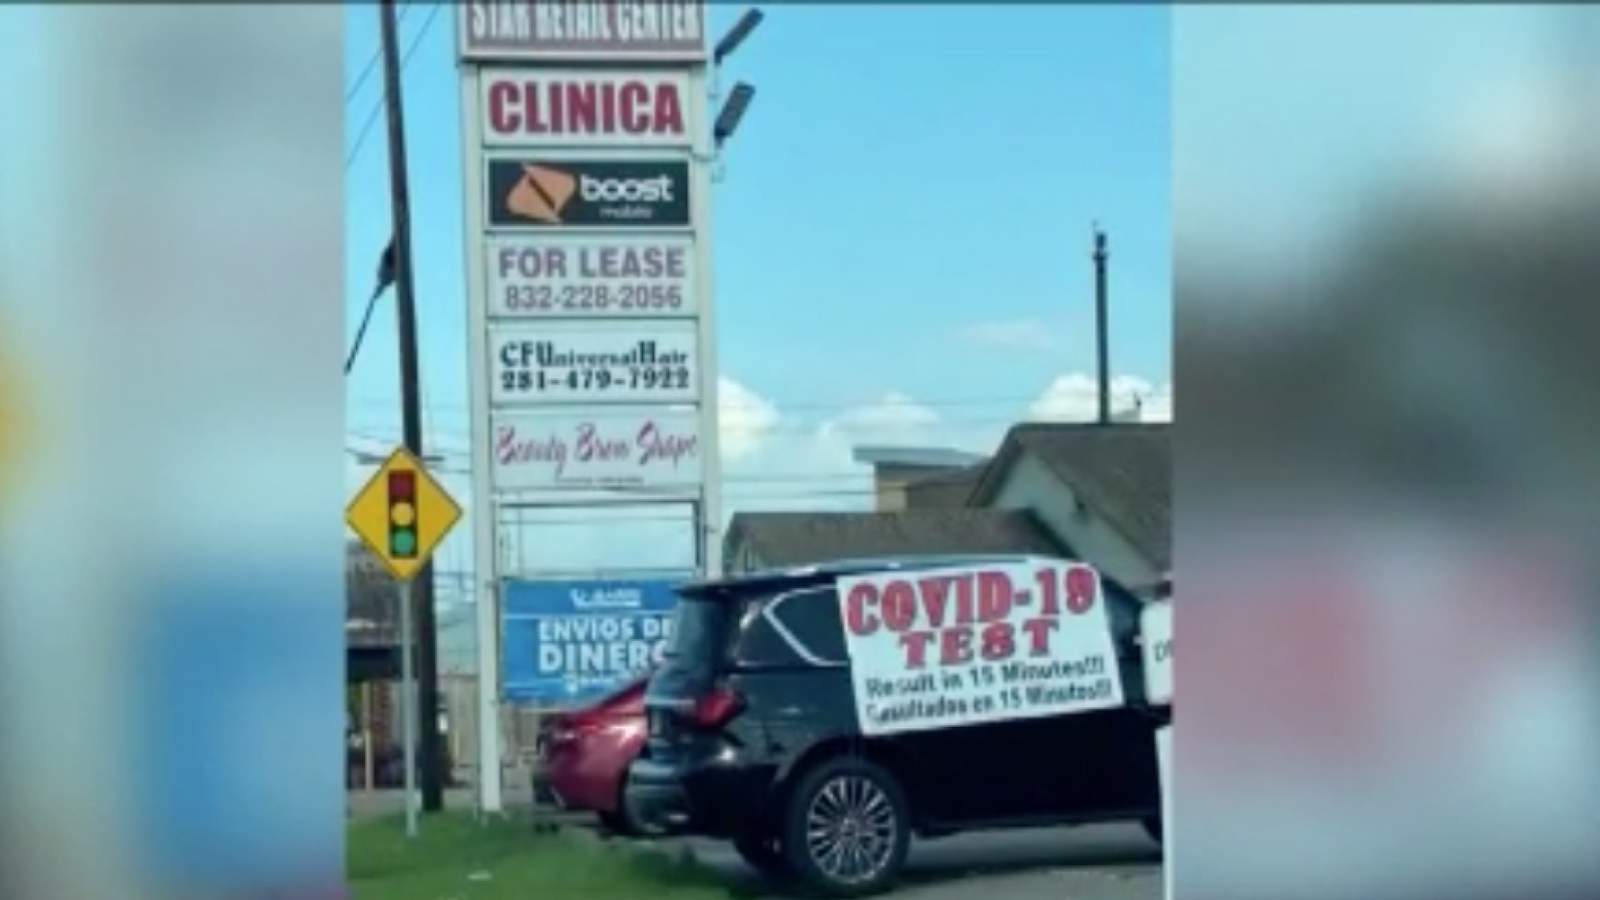 Customers that took misleading COVID-19 test at now-closed Houston area clinic upset with ‘scheme’